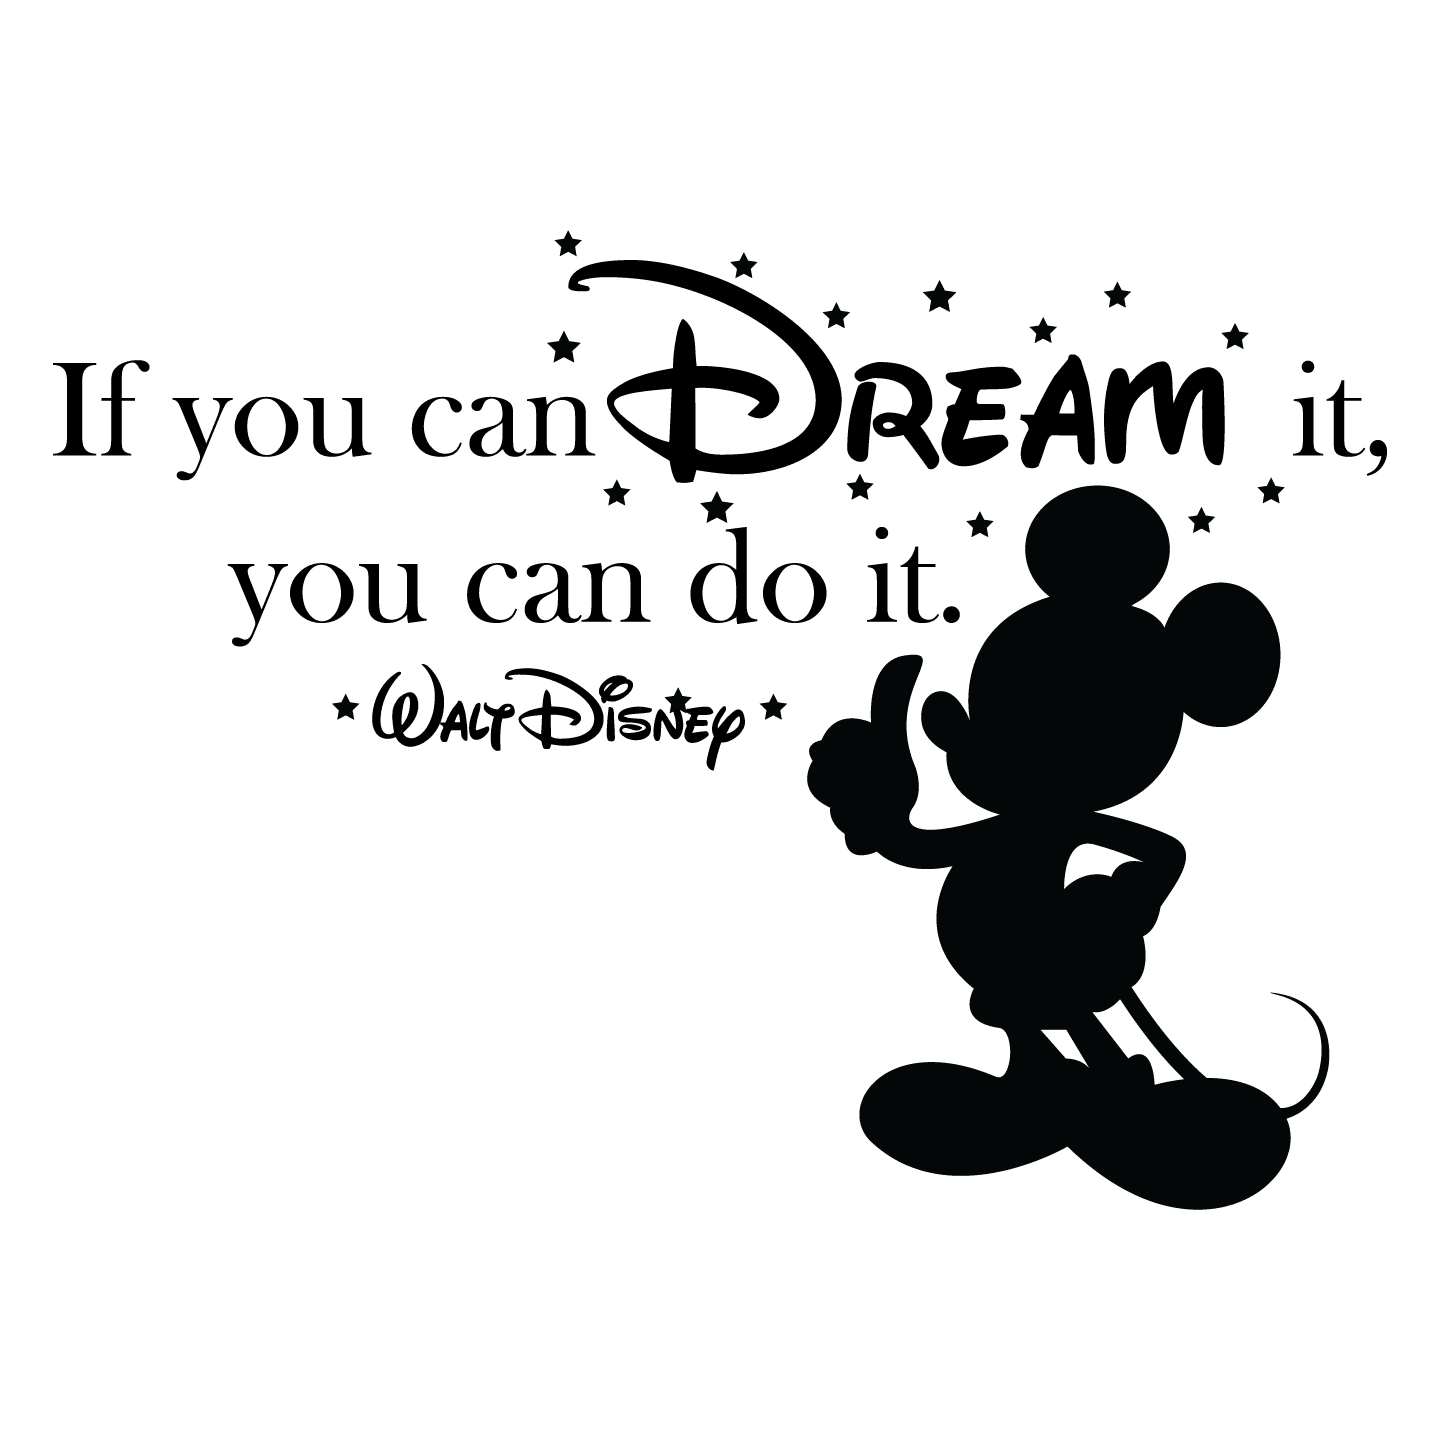 Walt Disney "All our Dreams" Vinyl Wall Art Quote Decal Sticker Mickey Adhesive 